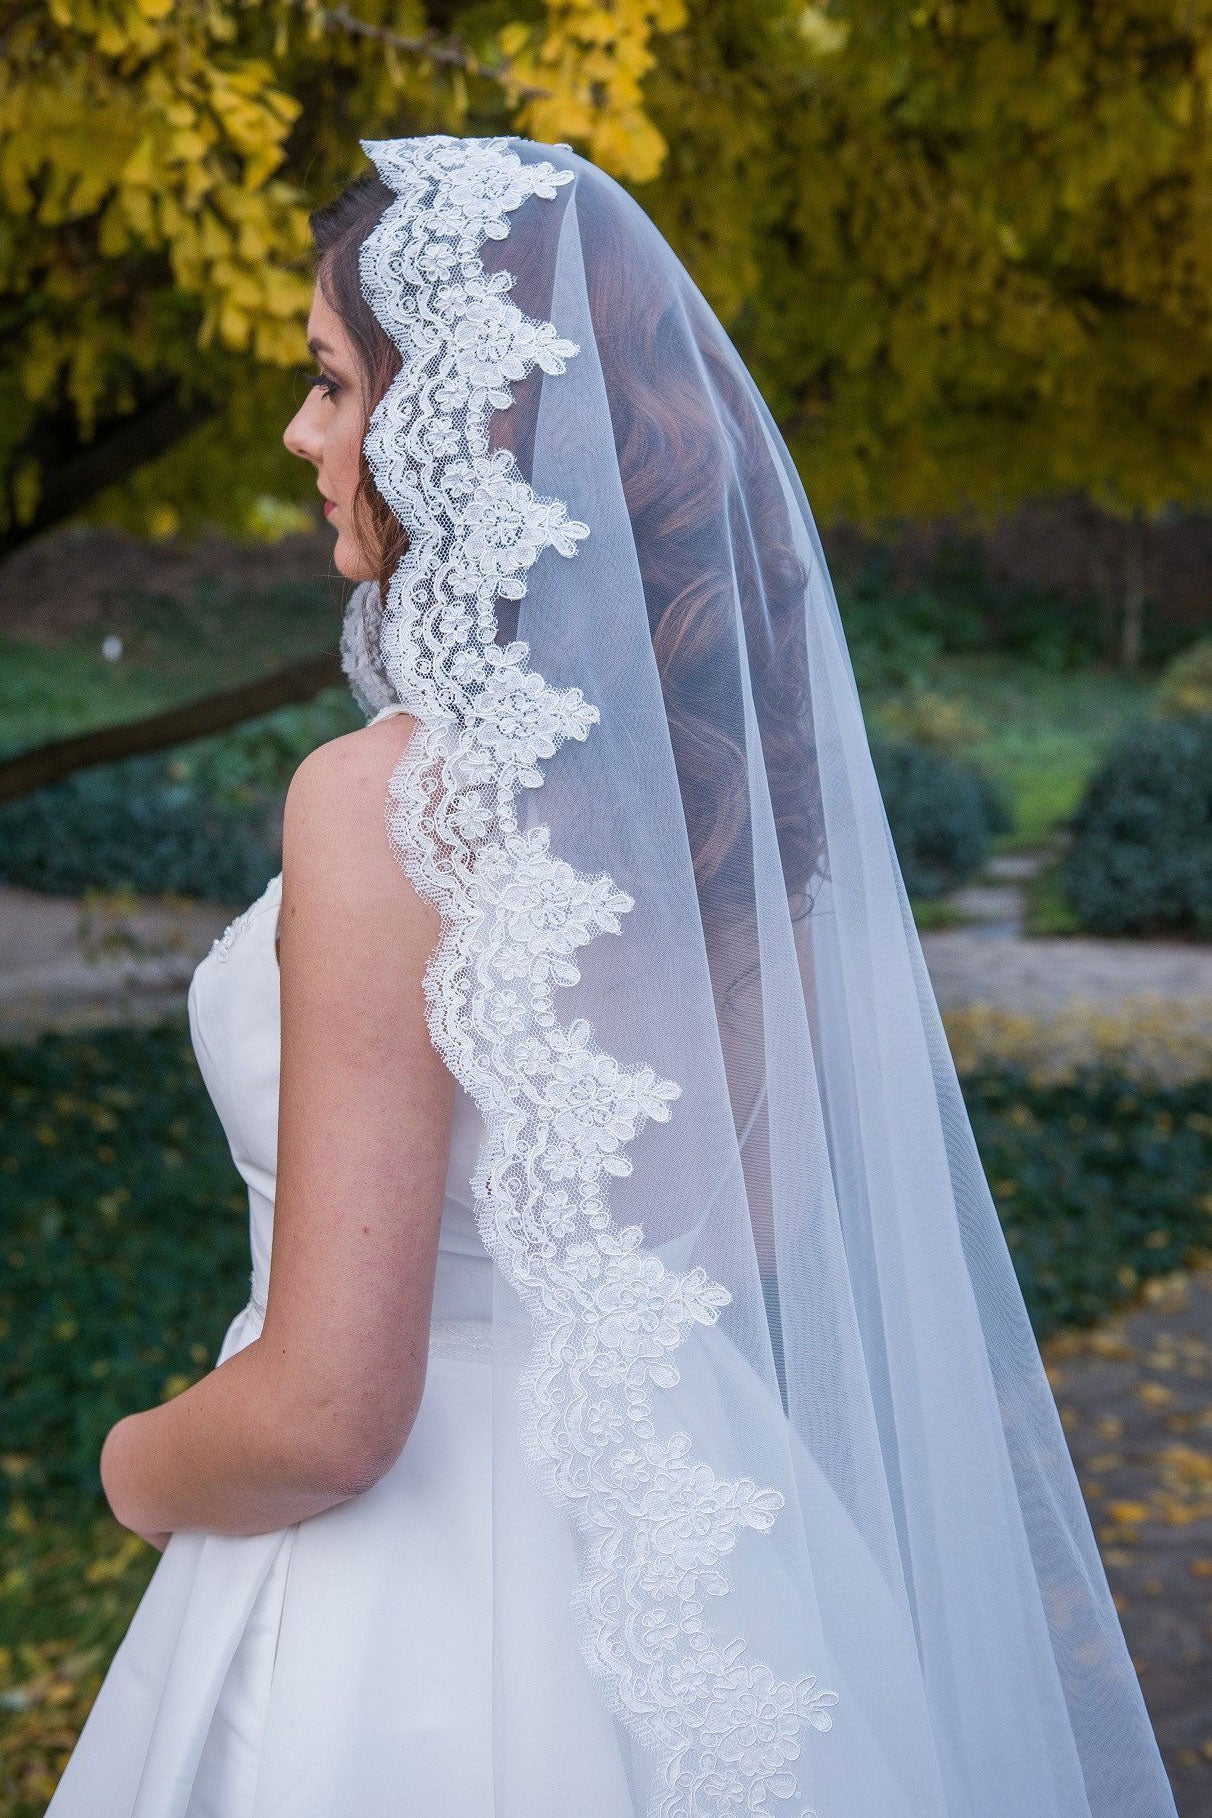 Lace Wedding Veils  Wedding veils with Lace